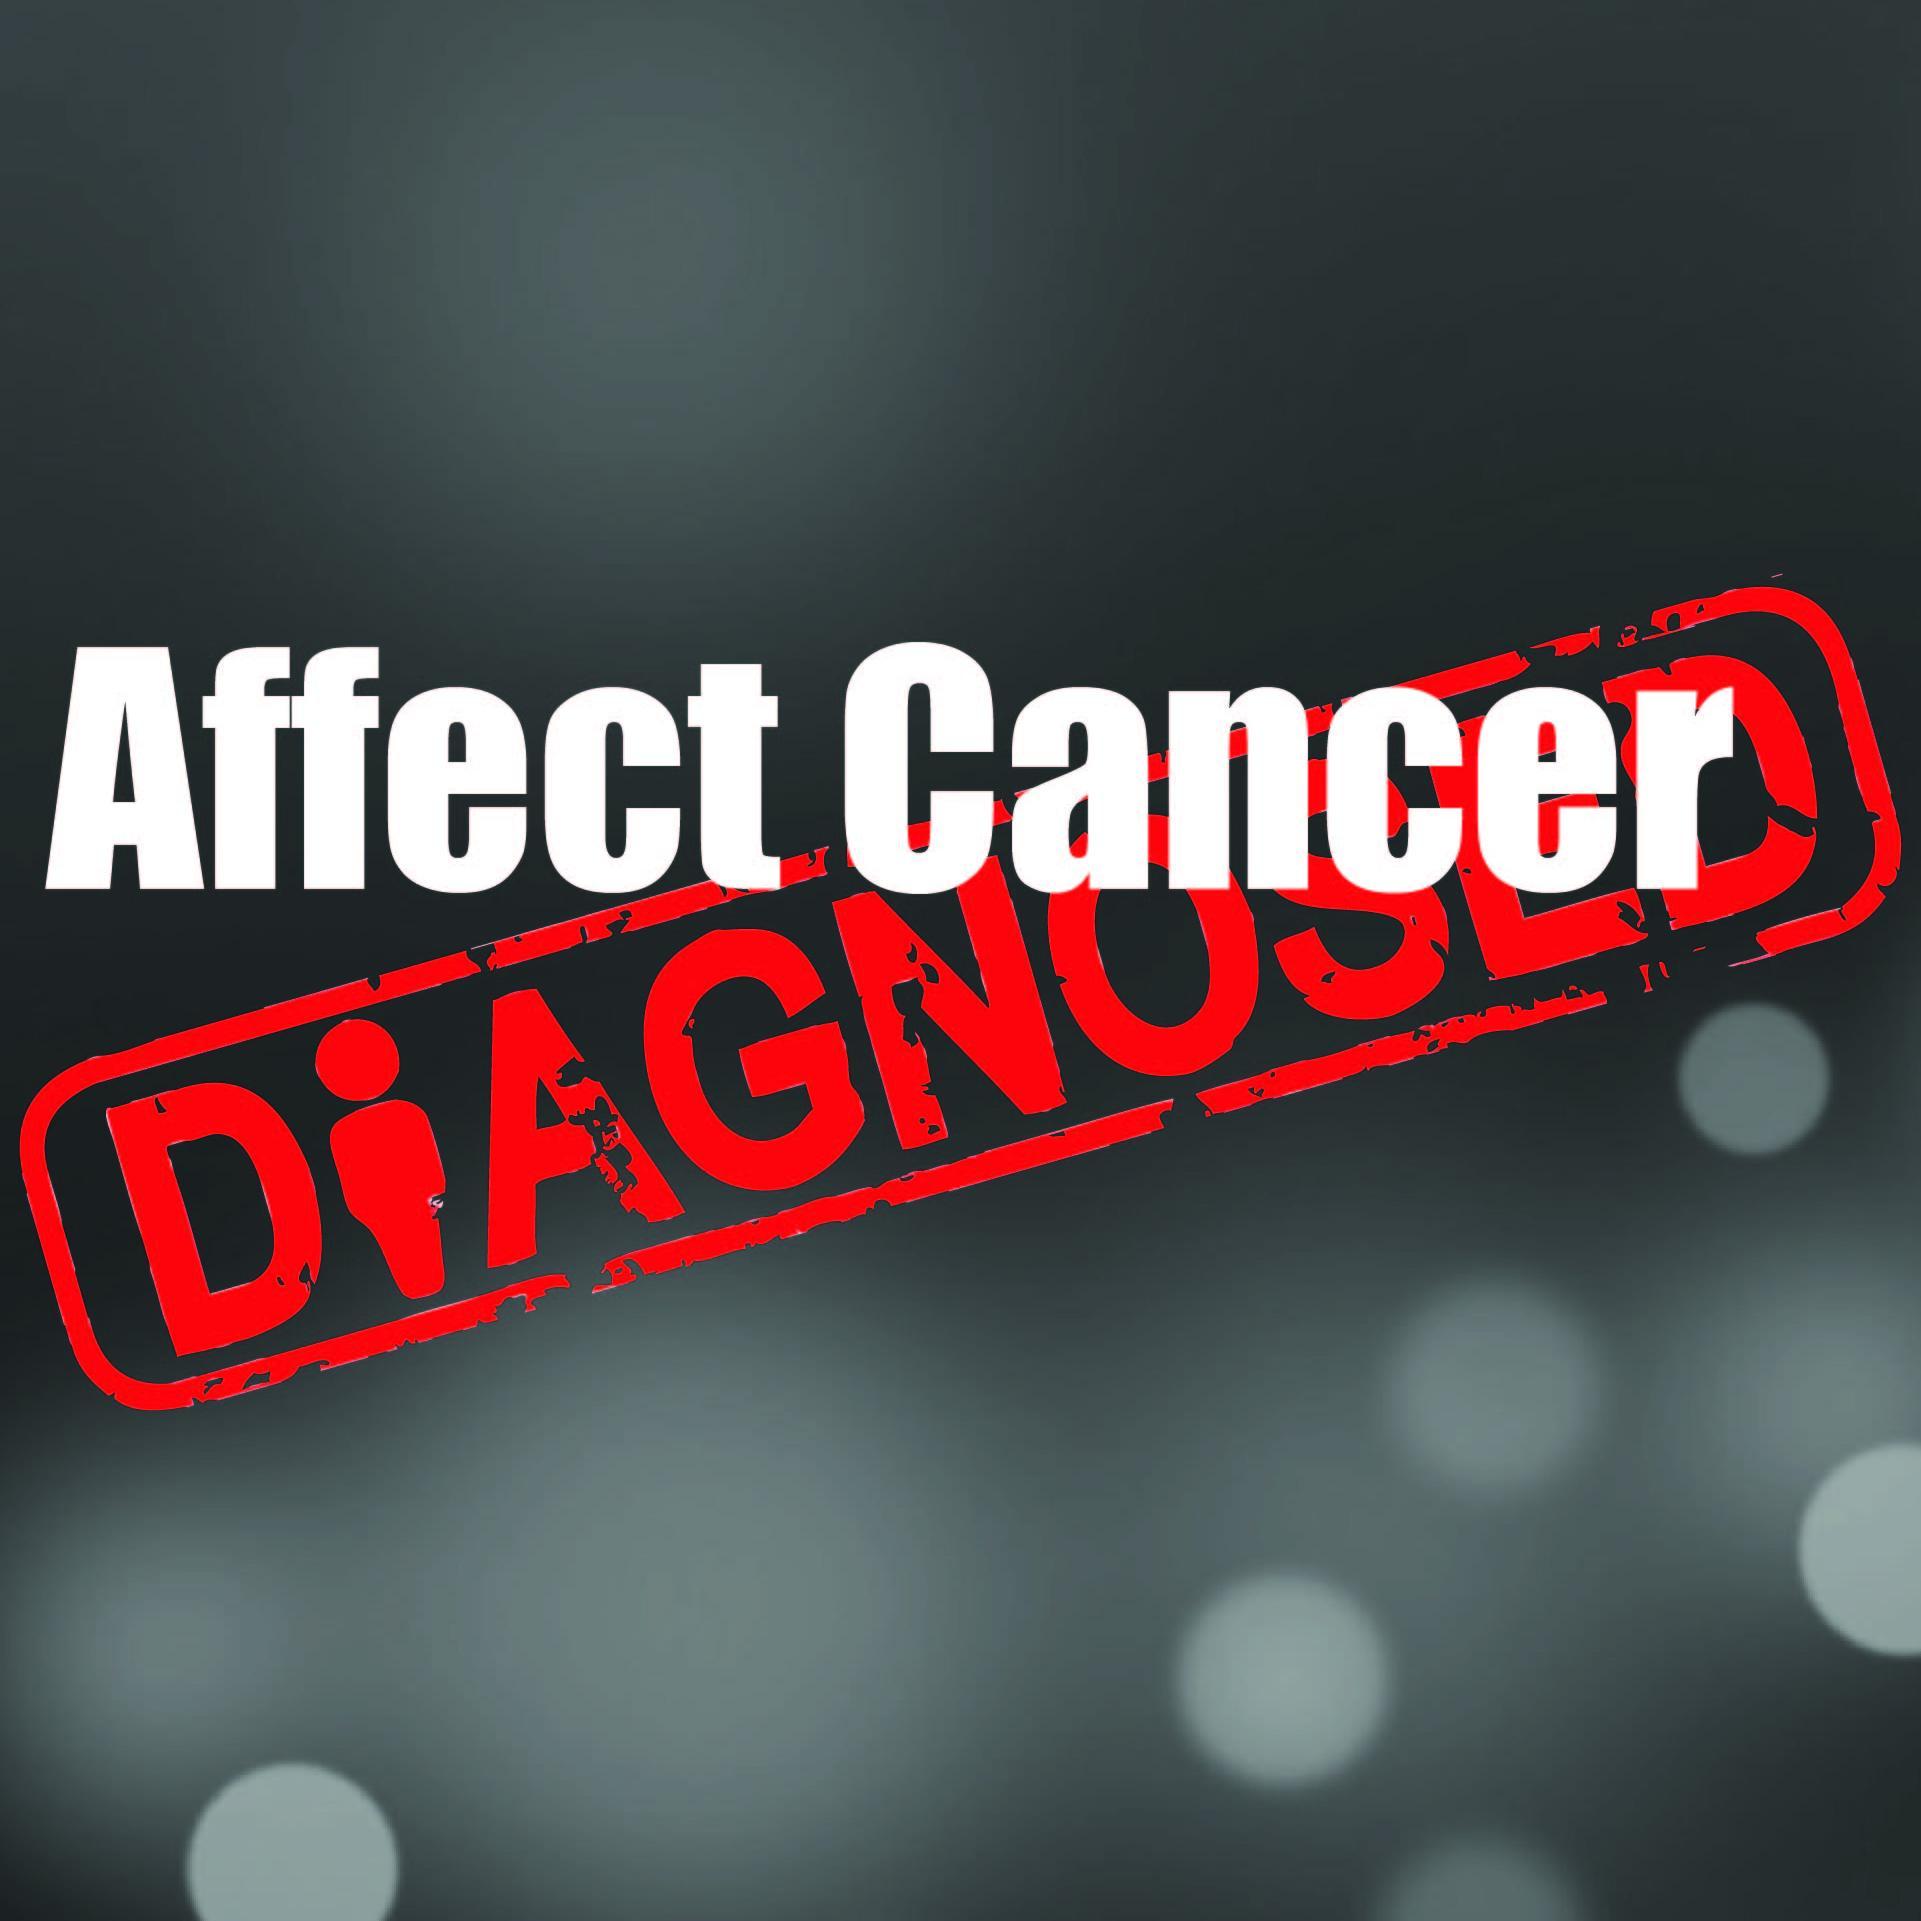 The Diagnosed TV Show tells the stories of cancer warriors and makes dreams come true along the way. Affect Cancer is a non-profit entity fighting cancer.